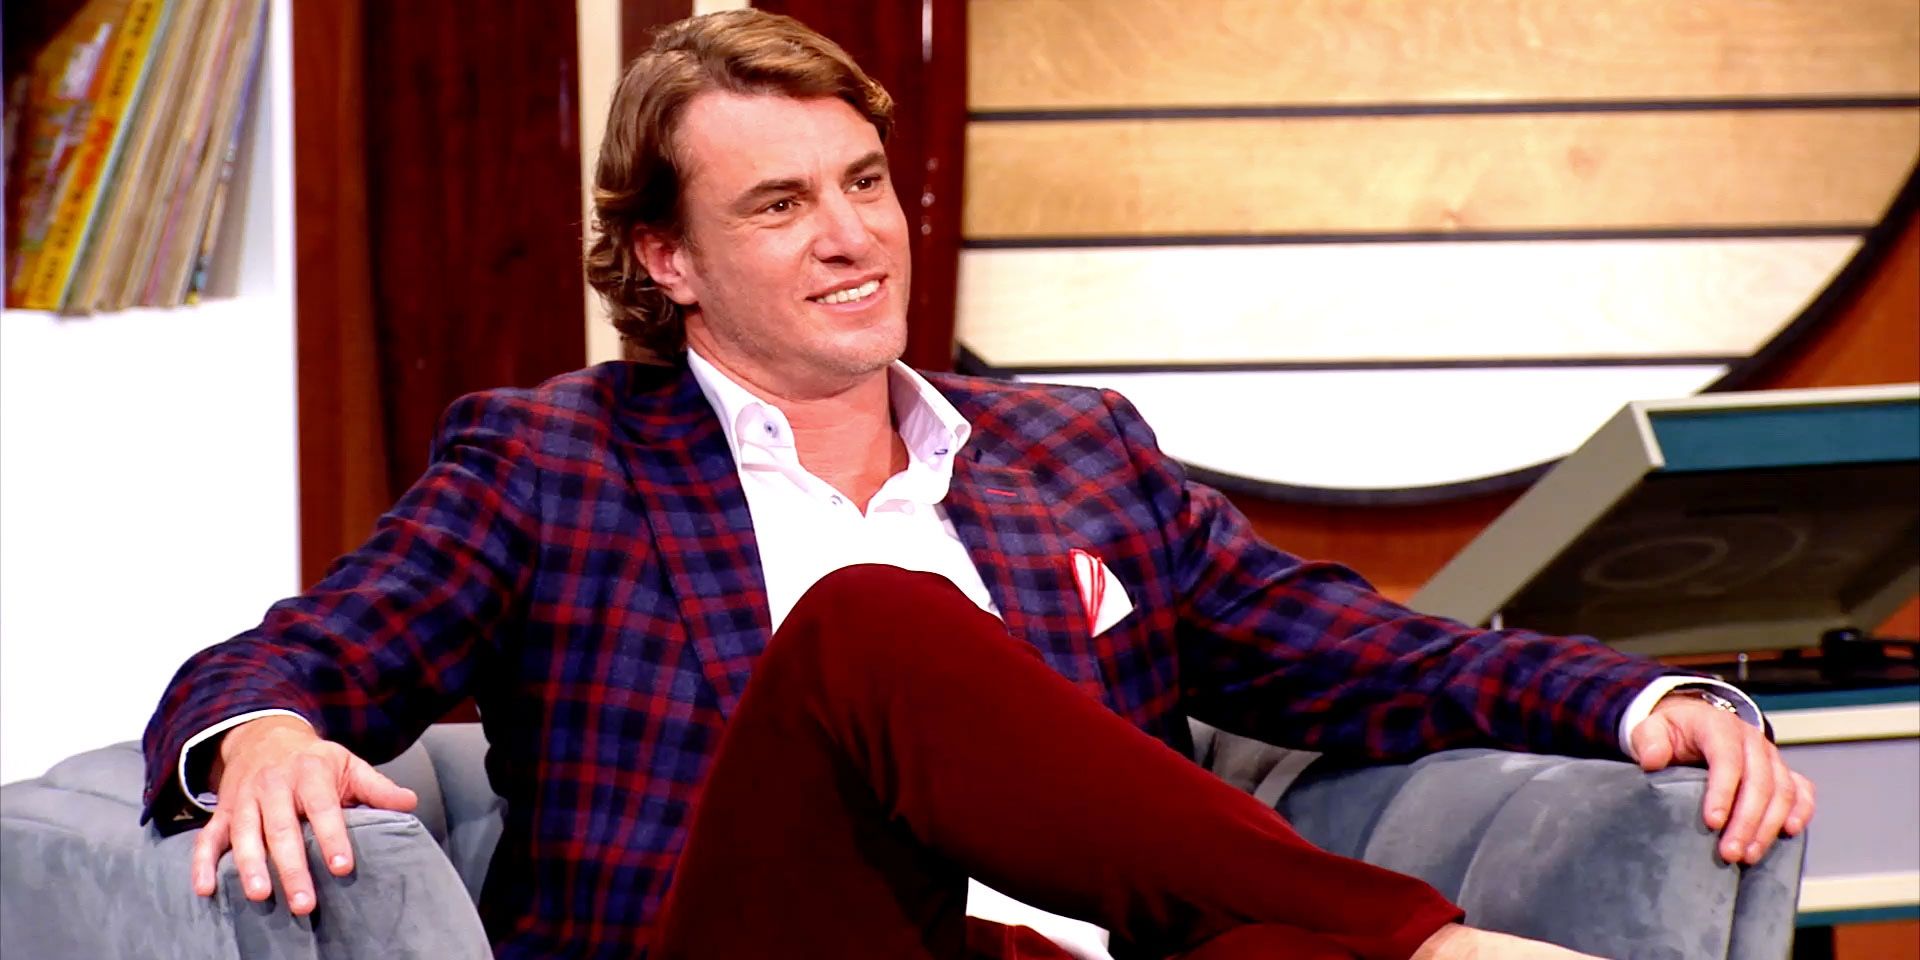 Shep Rose from Southern Charm wearing a plaid suit sitting down